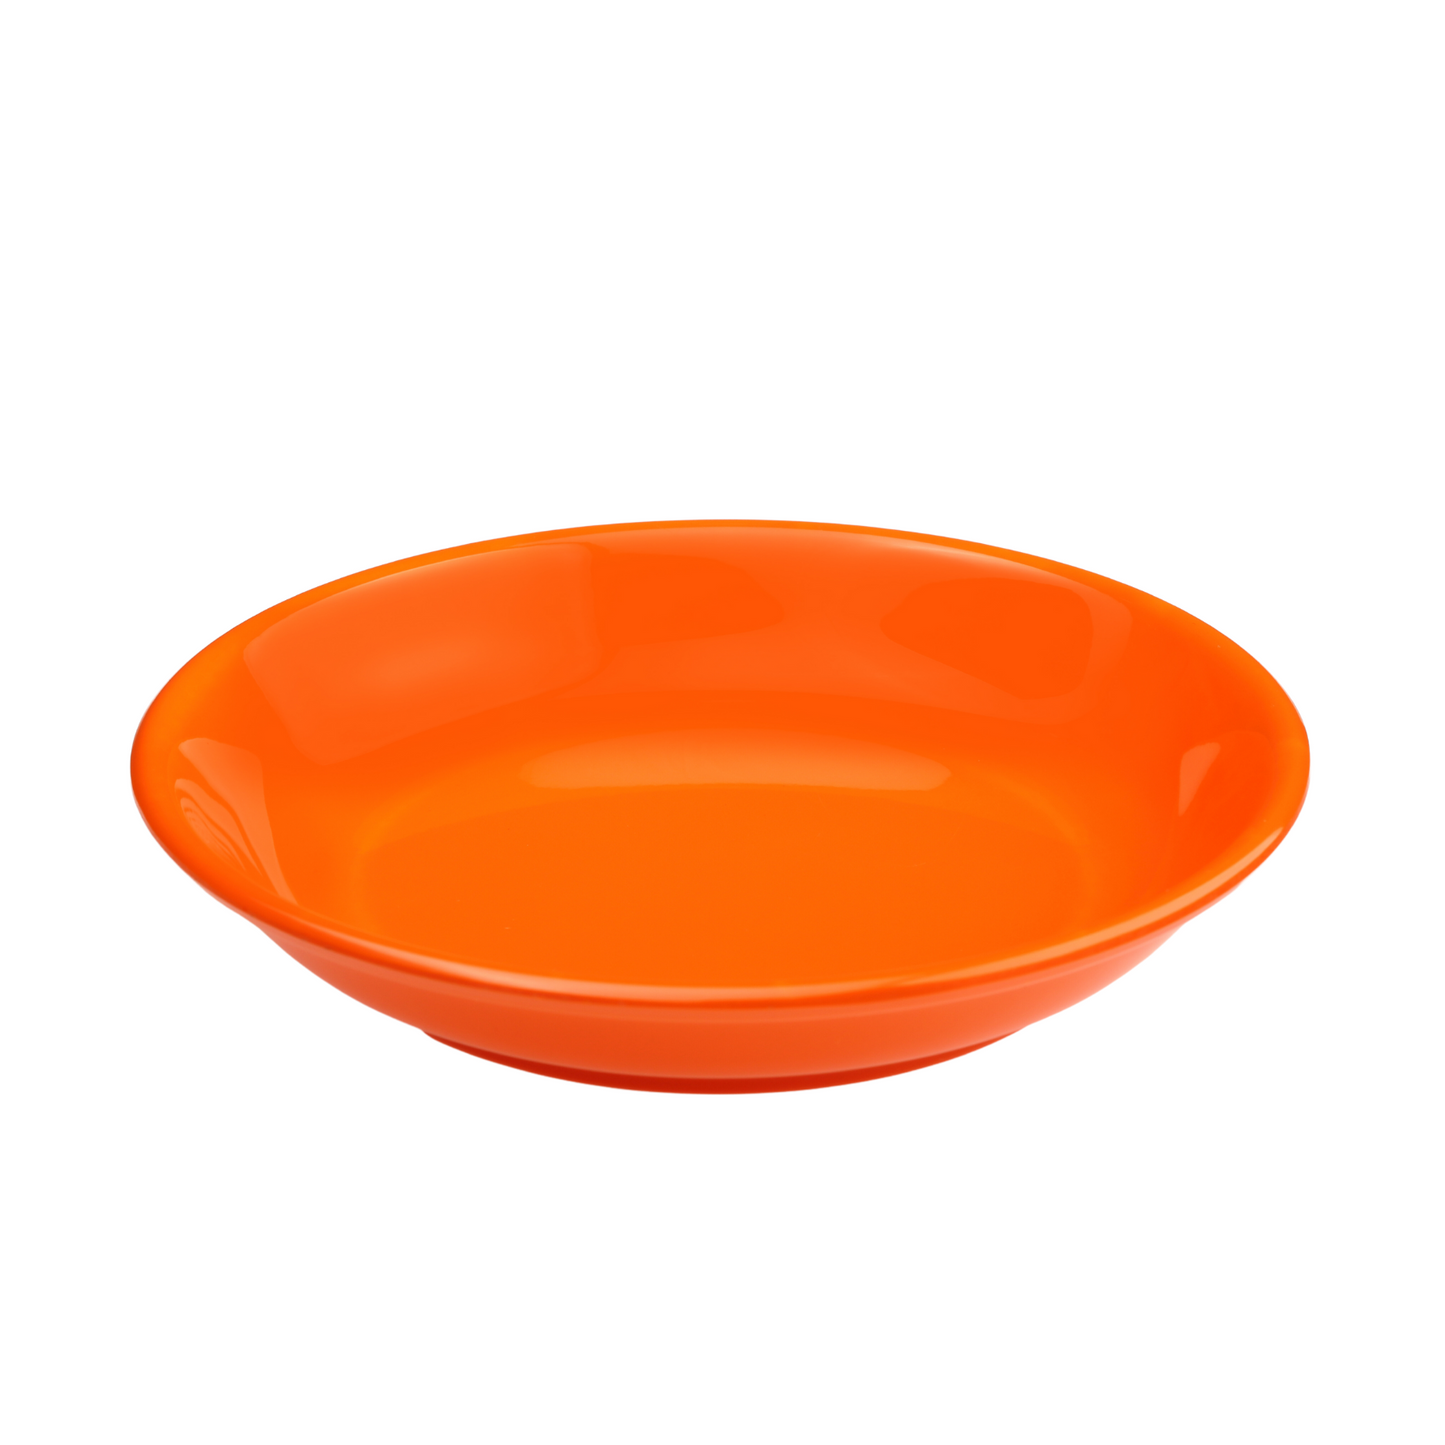 The Plate Story - Snack Plate 6.5” for Toddler - Orange